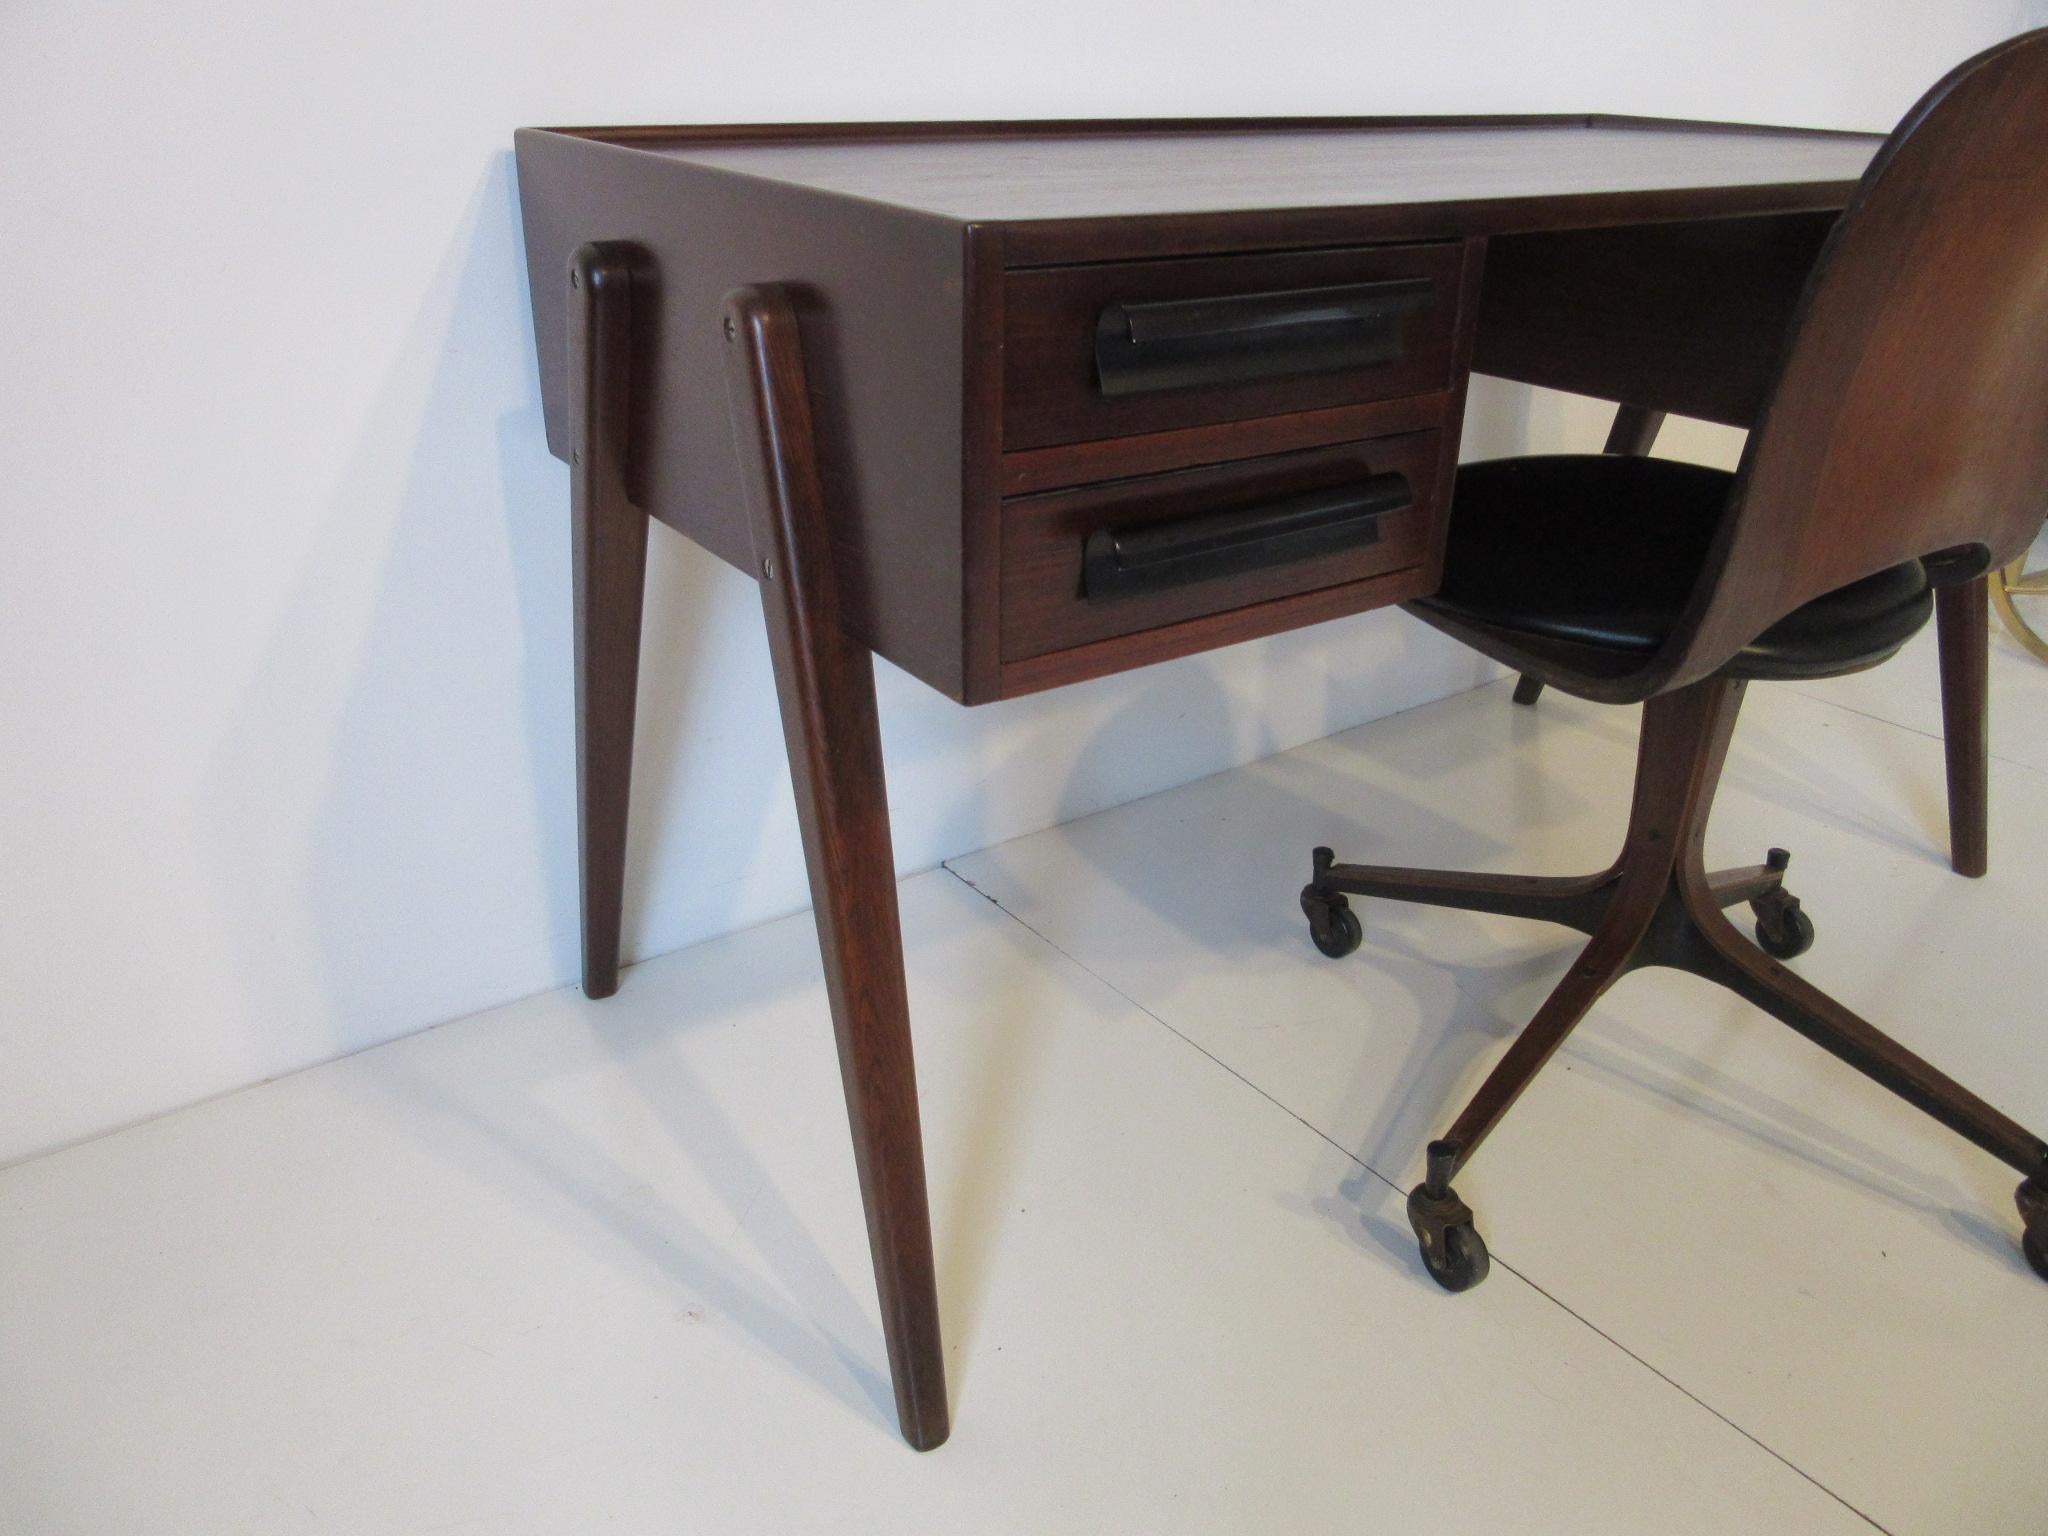 A hard to find Plycraft compass leg desk in a dark walnut tone teak and oak with three drawers, curved black metal pulls and matching sculptural bent ply chair with upholstered bottom pad and wheels . The detail to the desk with it's tapered top